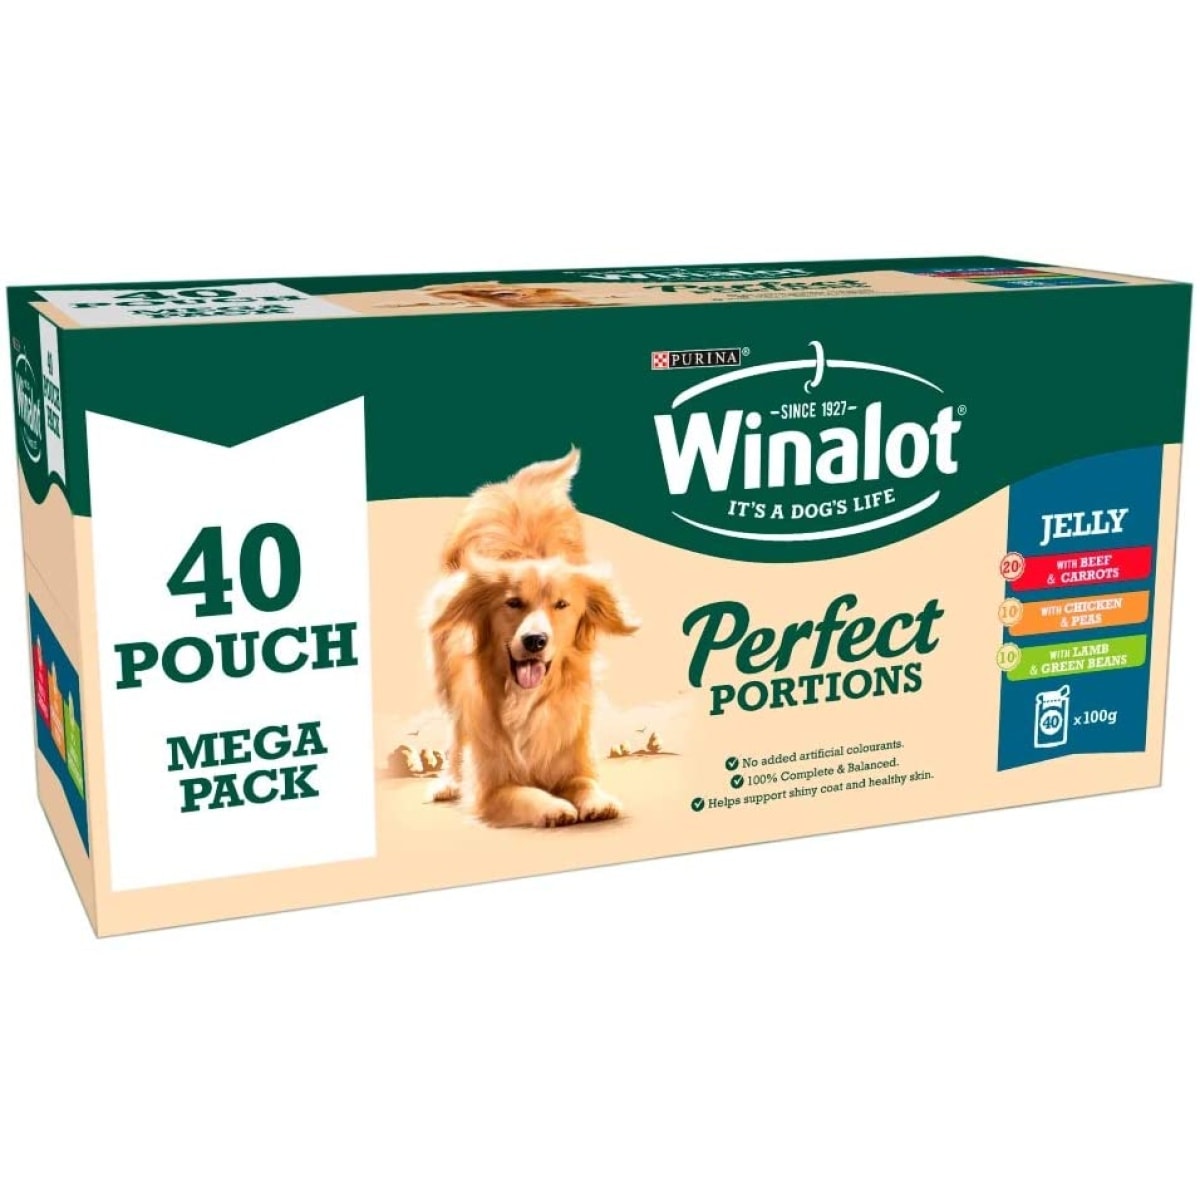 Winalot Perfect Portions Jelly 40 pack Main Image